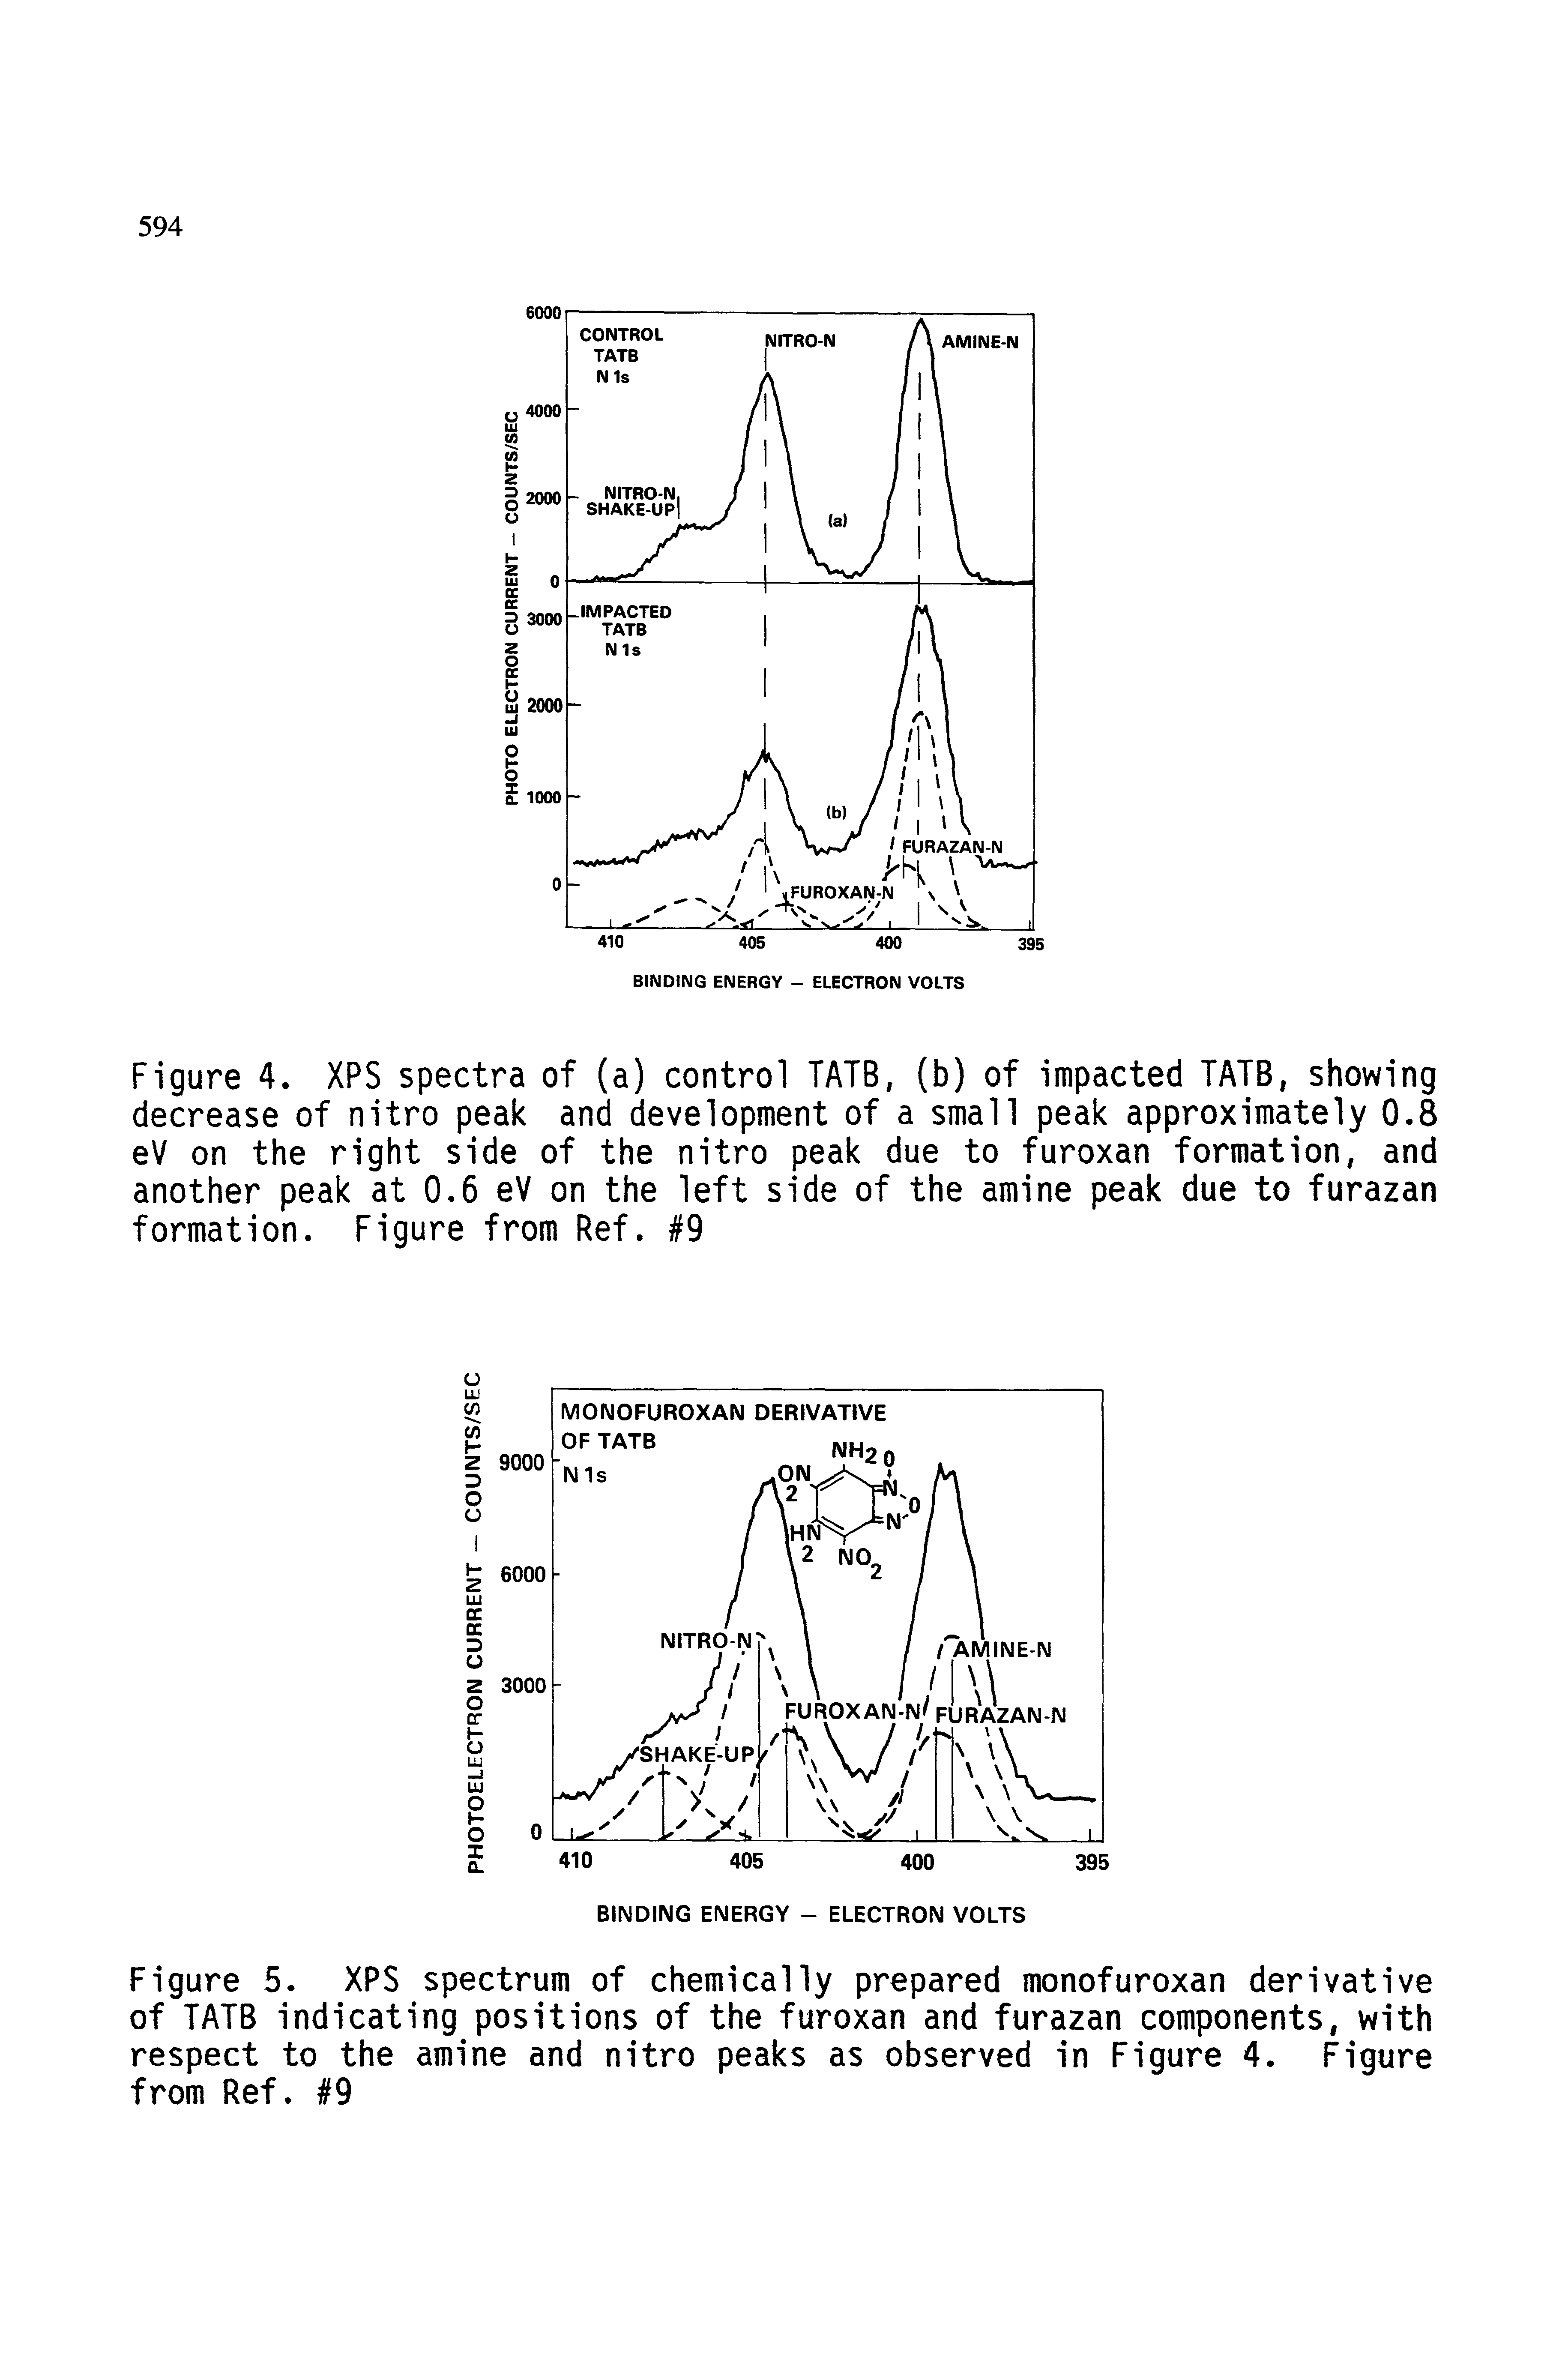 Figure 5. XPS spectrum of chemically prepared monofuroxan derivative of TATB indicating positions of the furoxan and furazan components, with respect to the amine and nitro peaks as observed in Figure 4. Figure from Ref. 9...